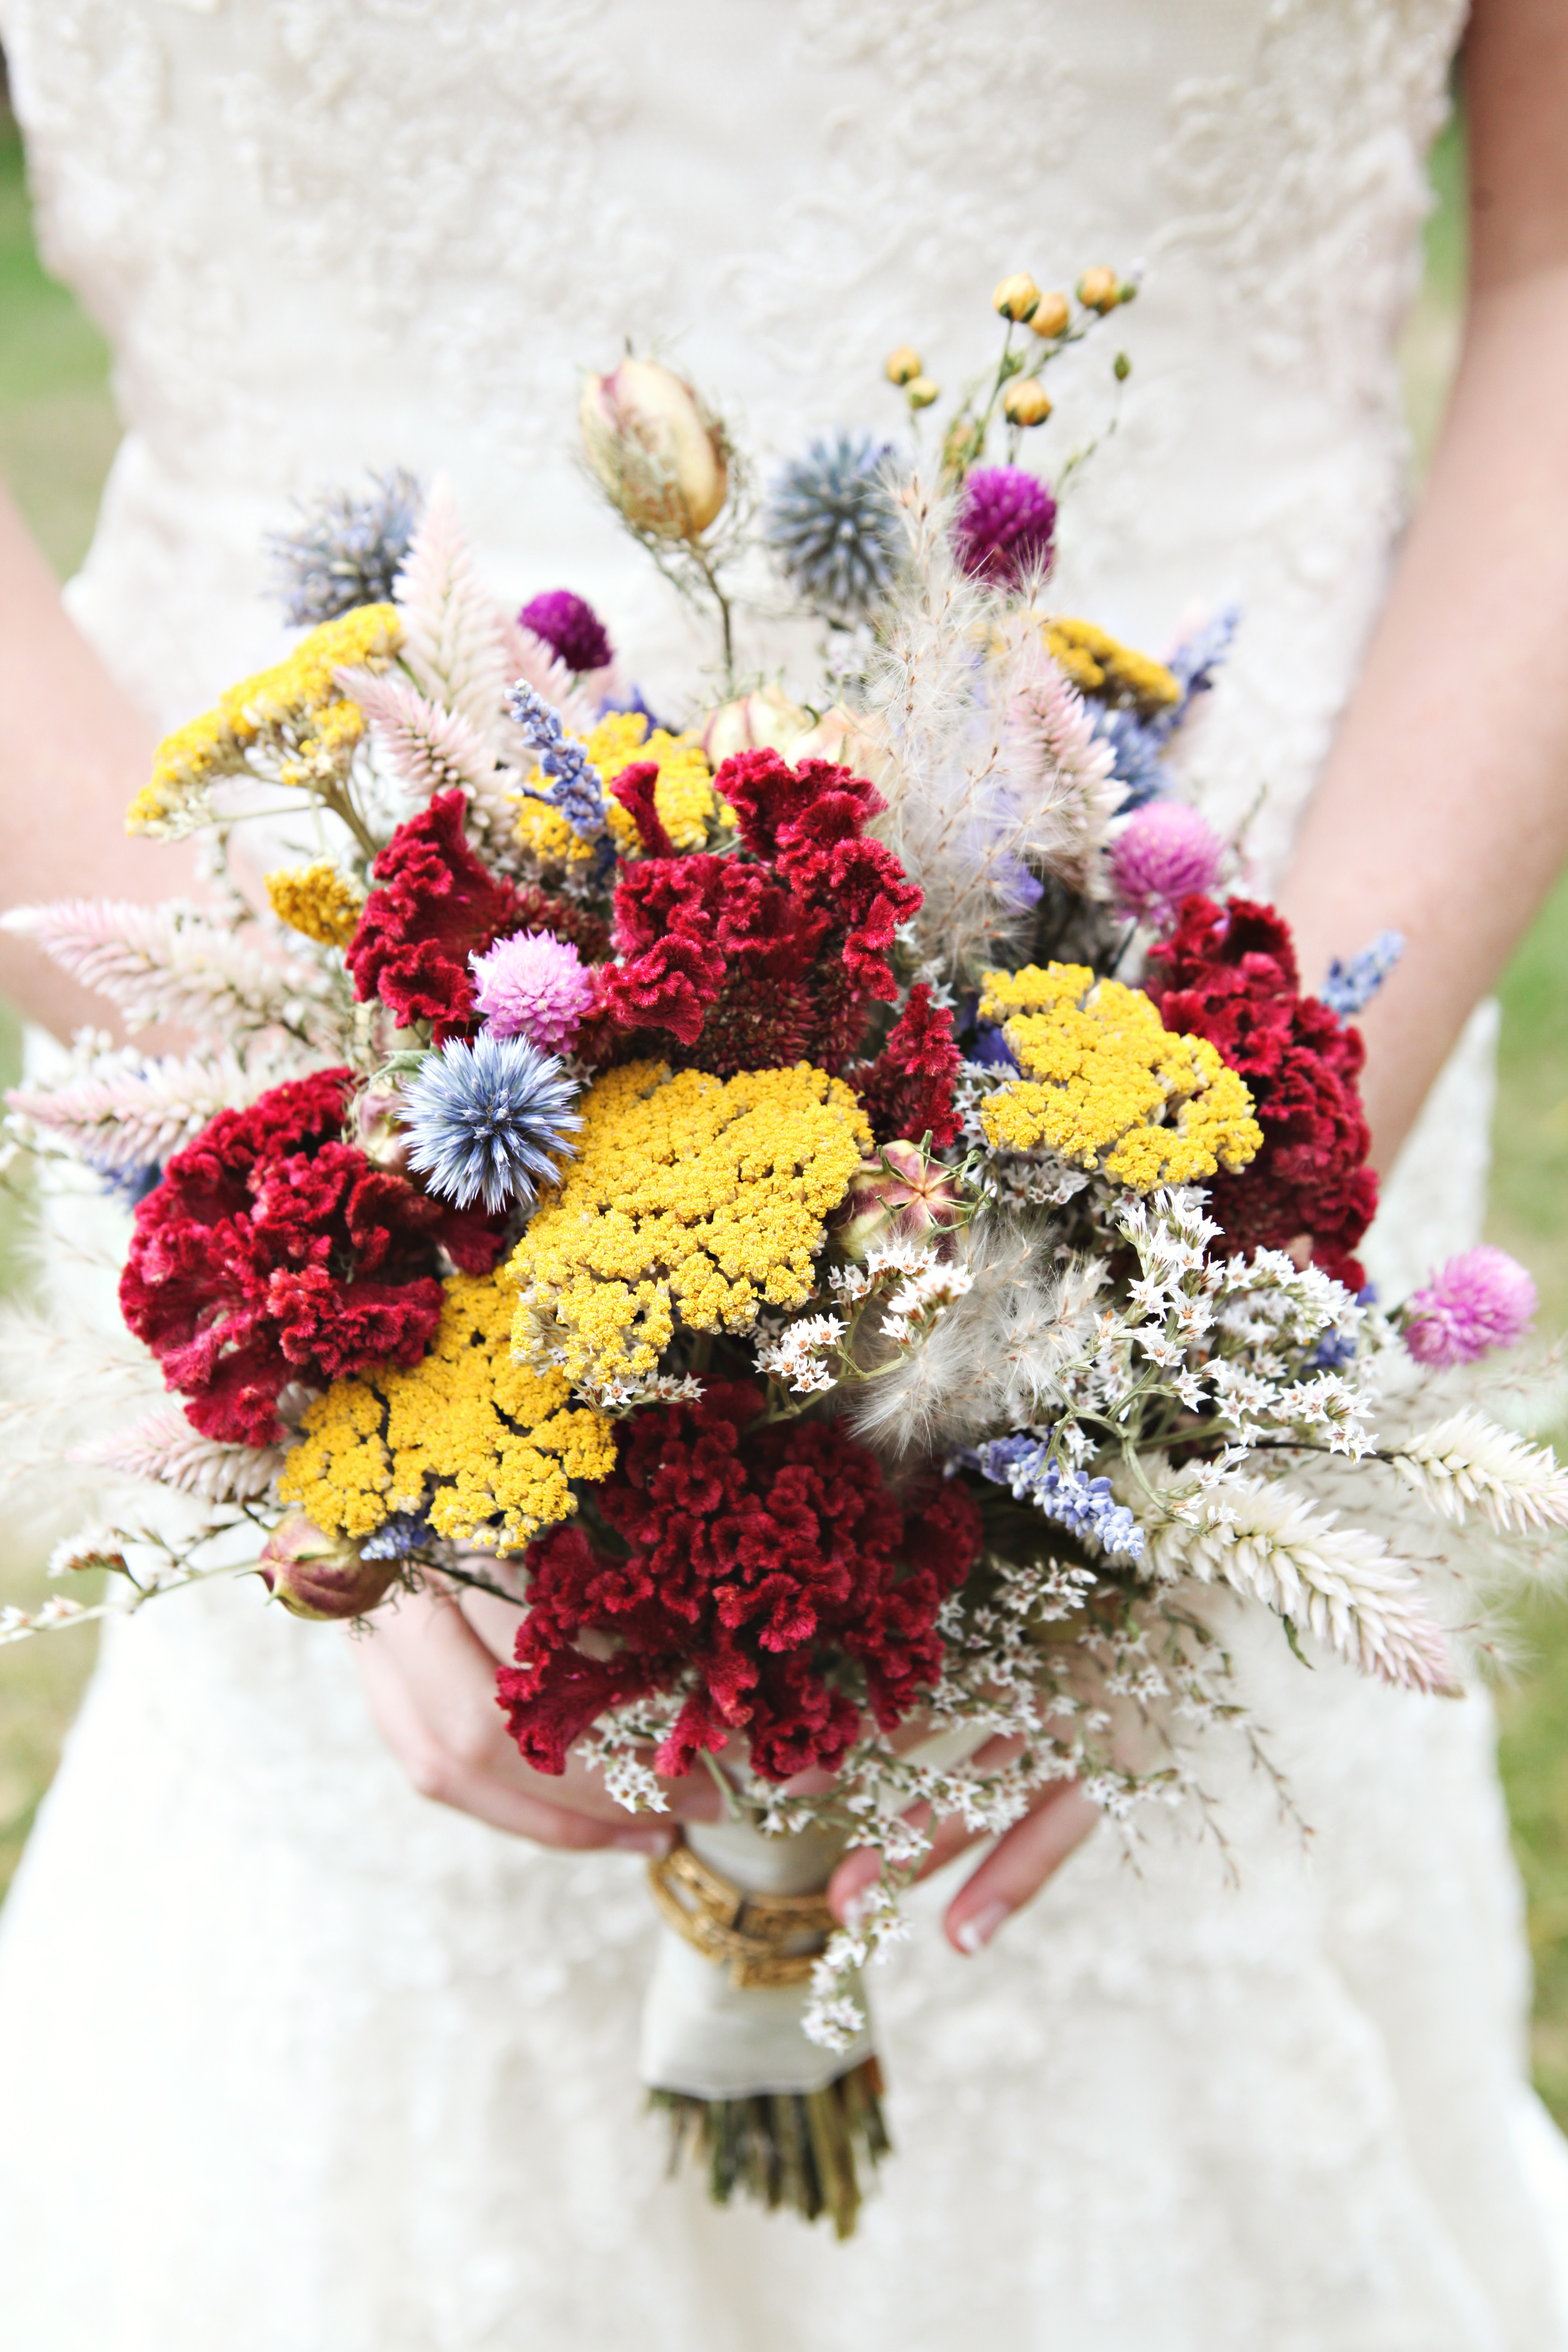 Hearty flowers for wedding bouquets